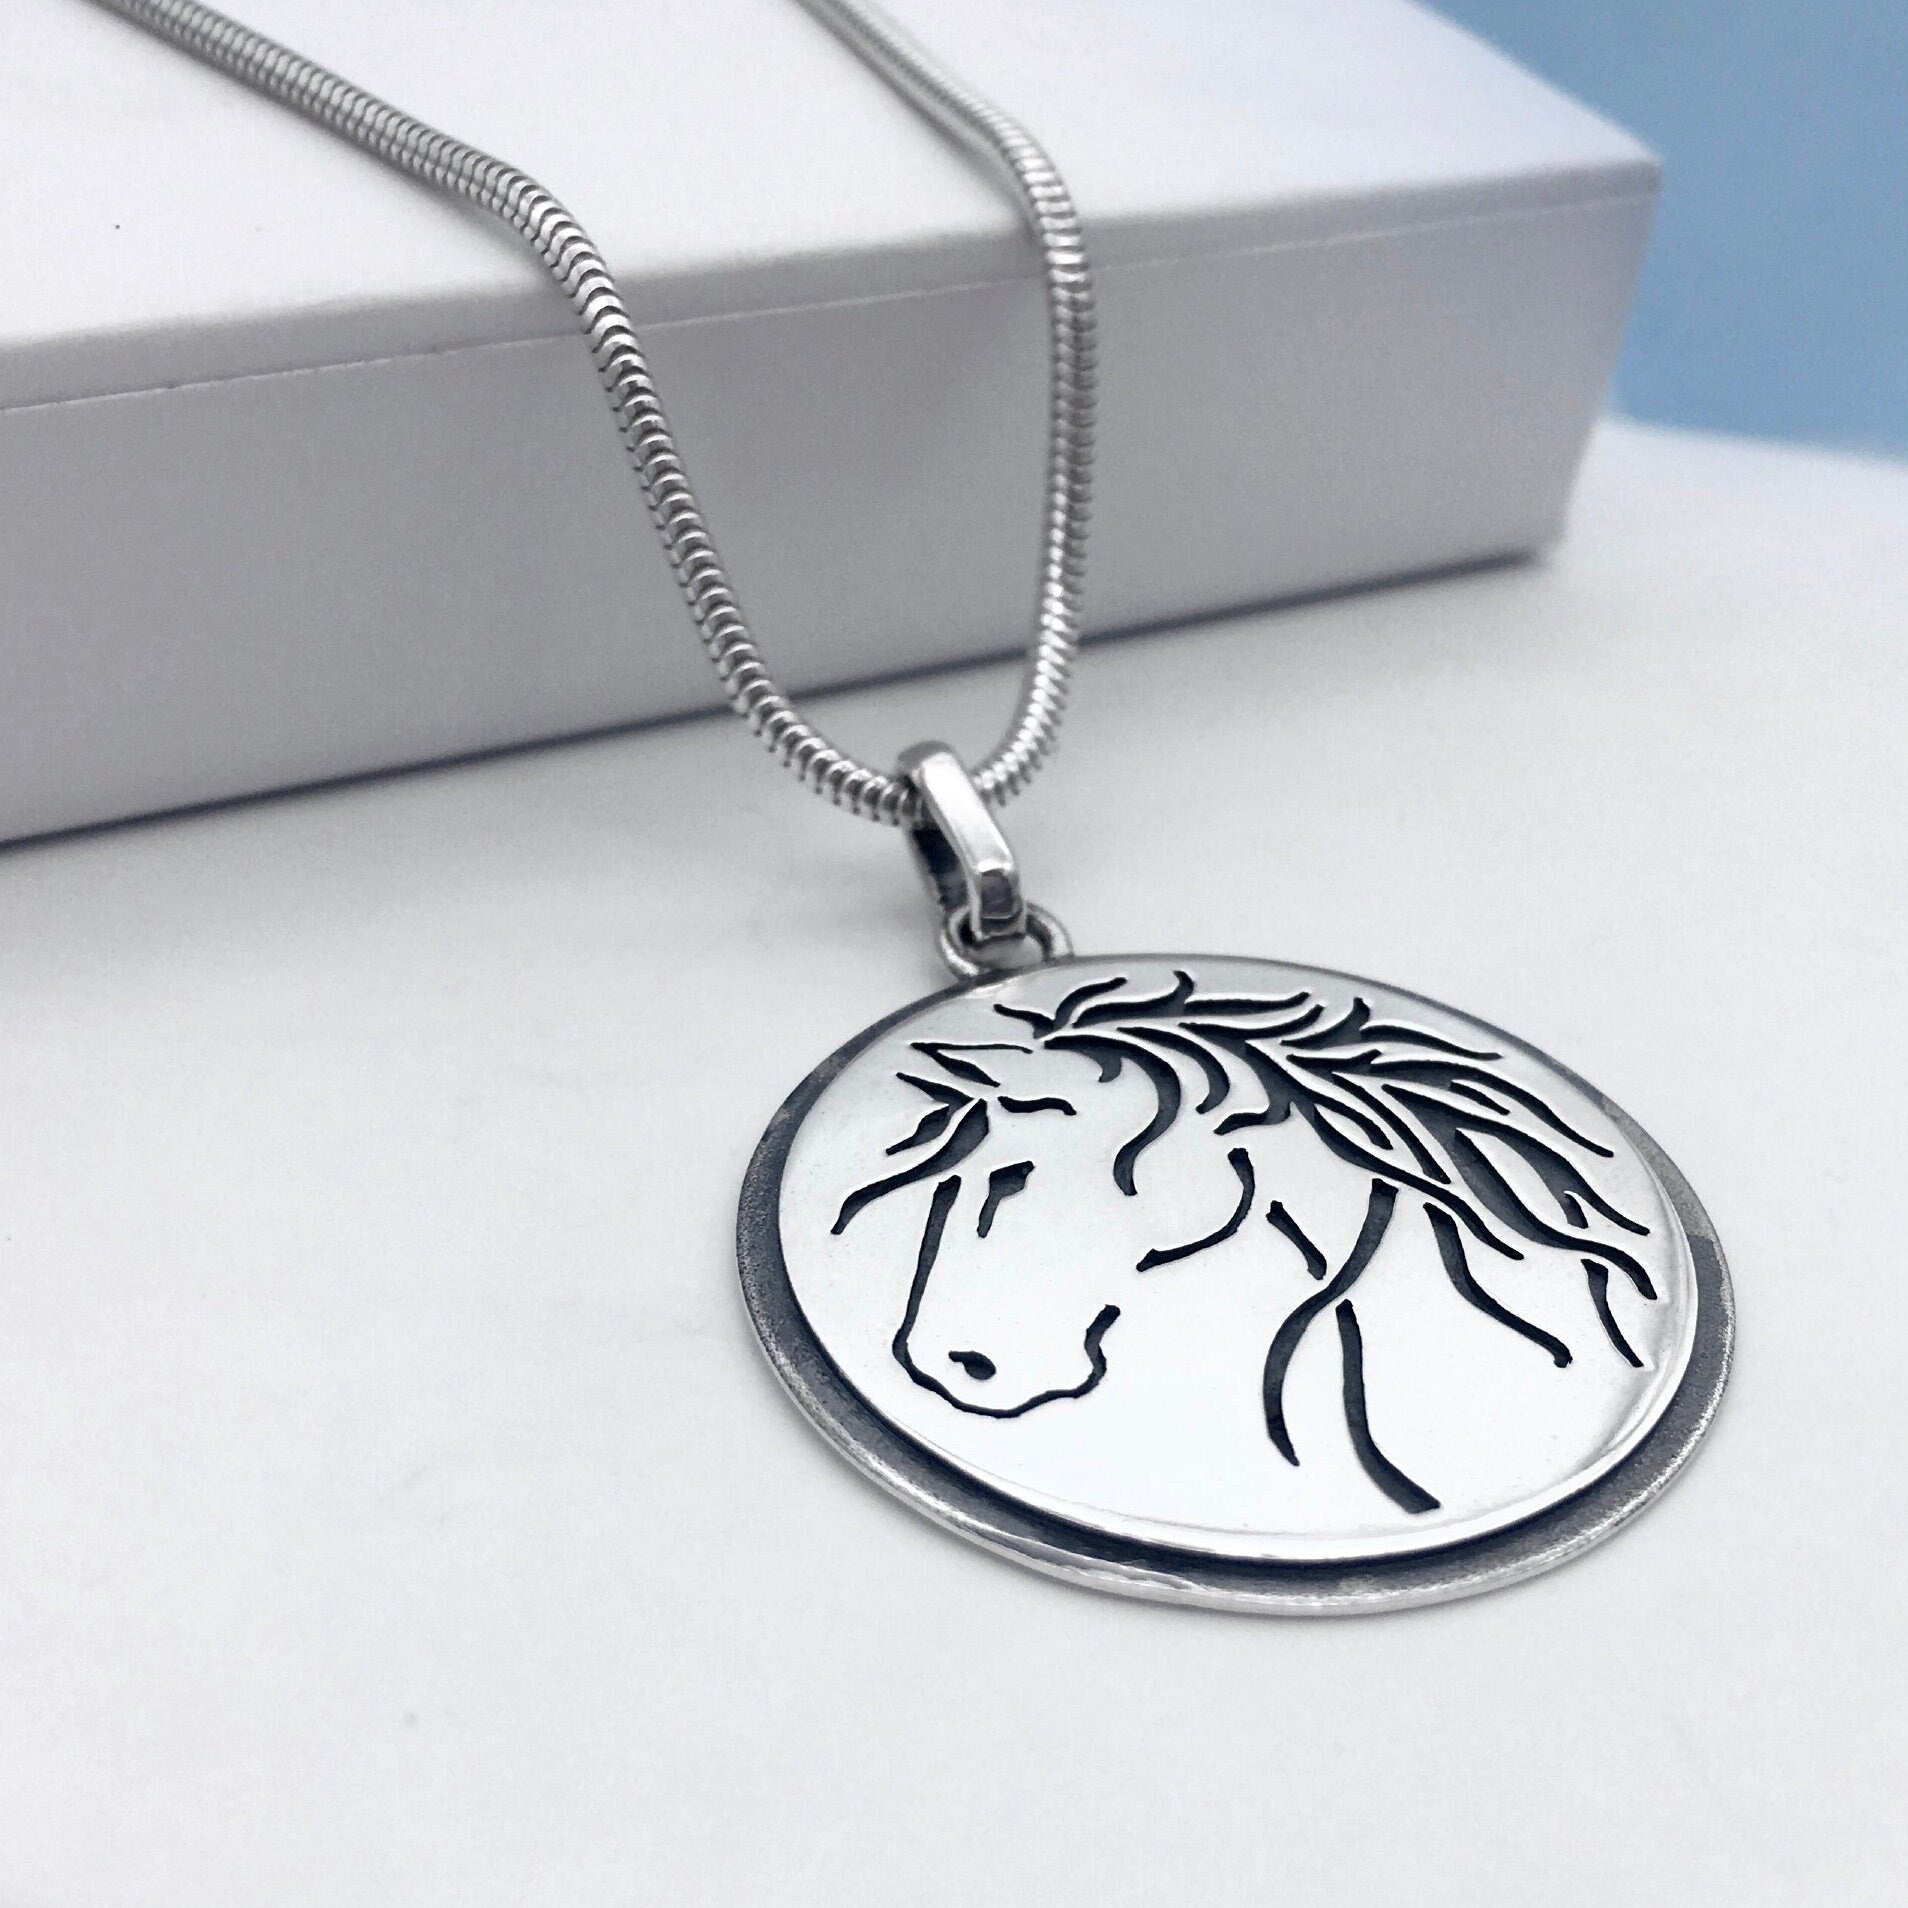 Silver Horse Head Pendant Necklace Horsehead Silver Necklace Equestrian Necklace Equine Jewelry Gift for Horse Lover Horses Head Jewellery